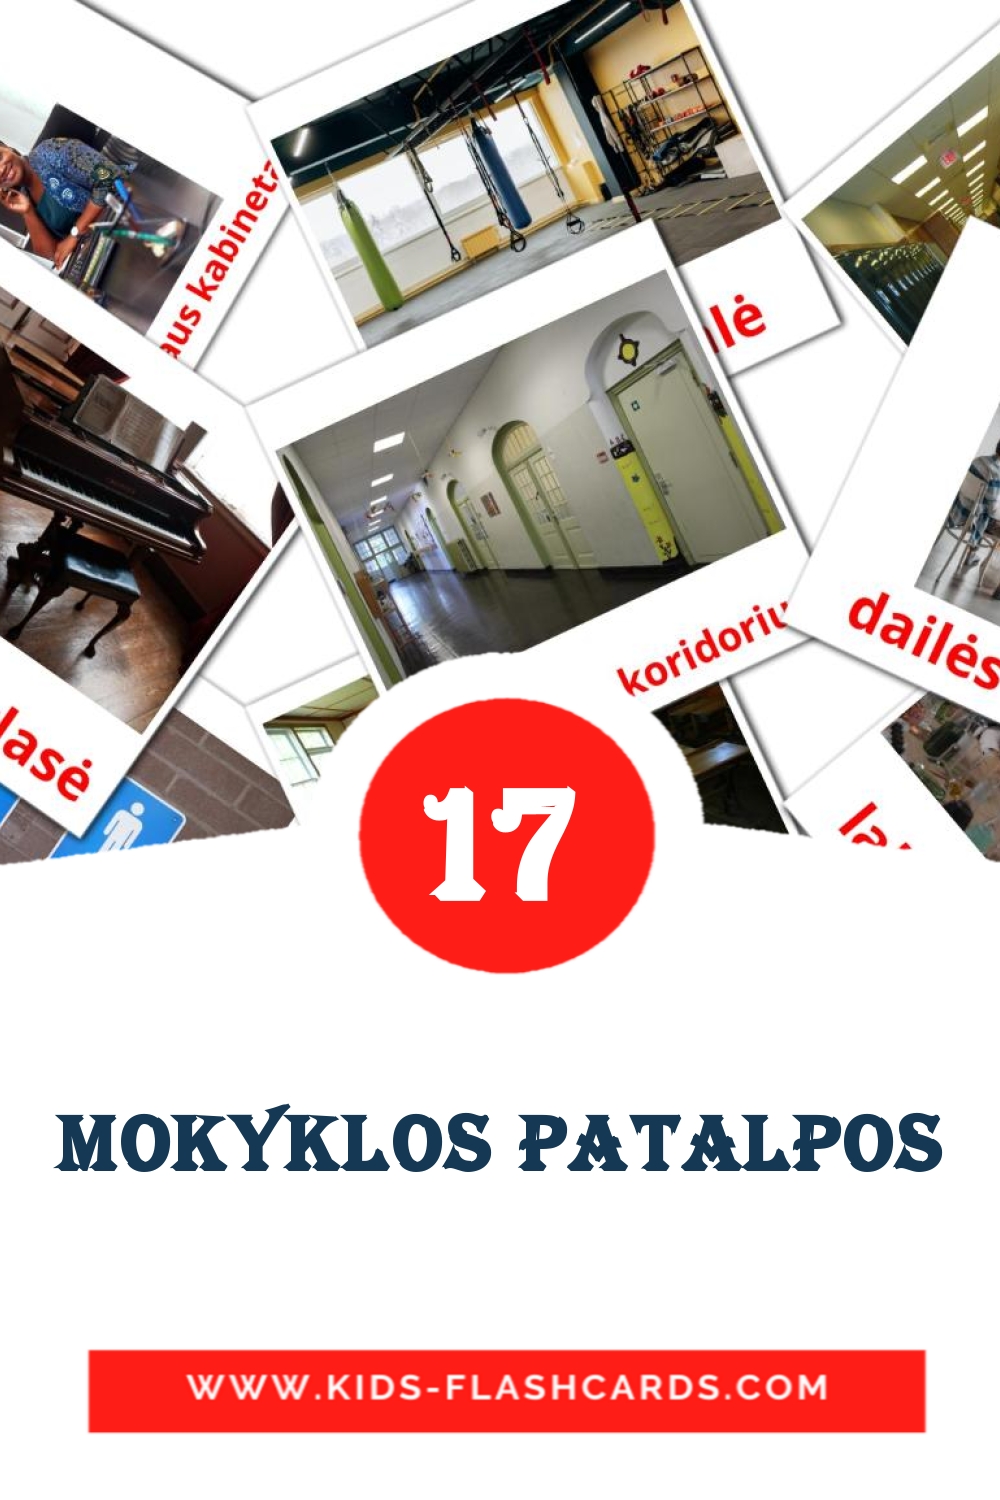 17 mokyklos patalpos Picture Cards for Kindergarden in lithuanian